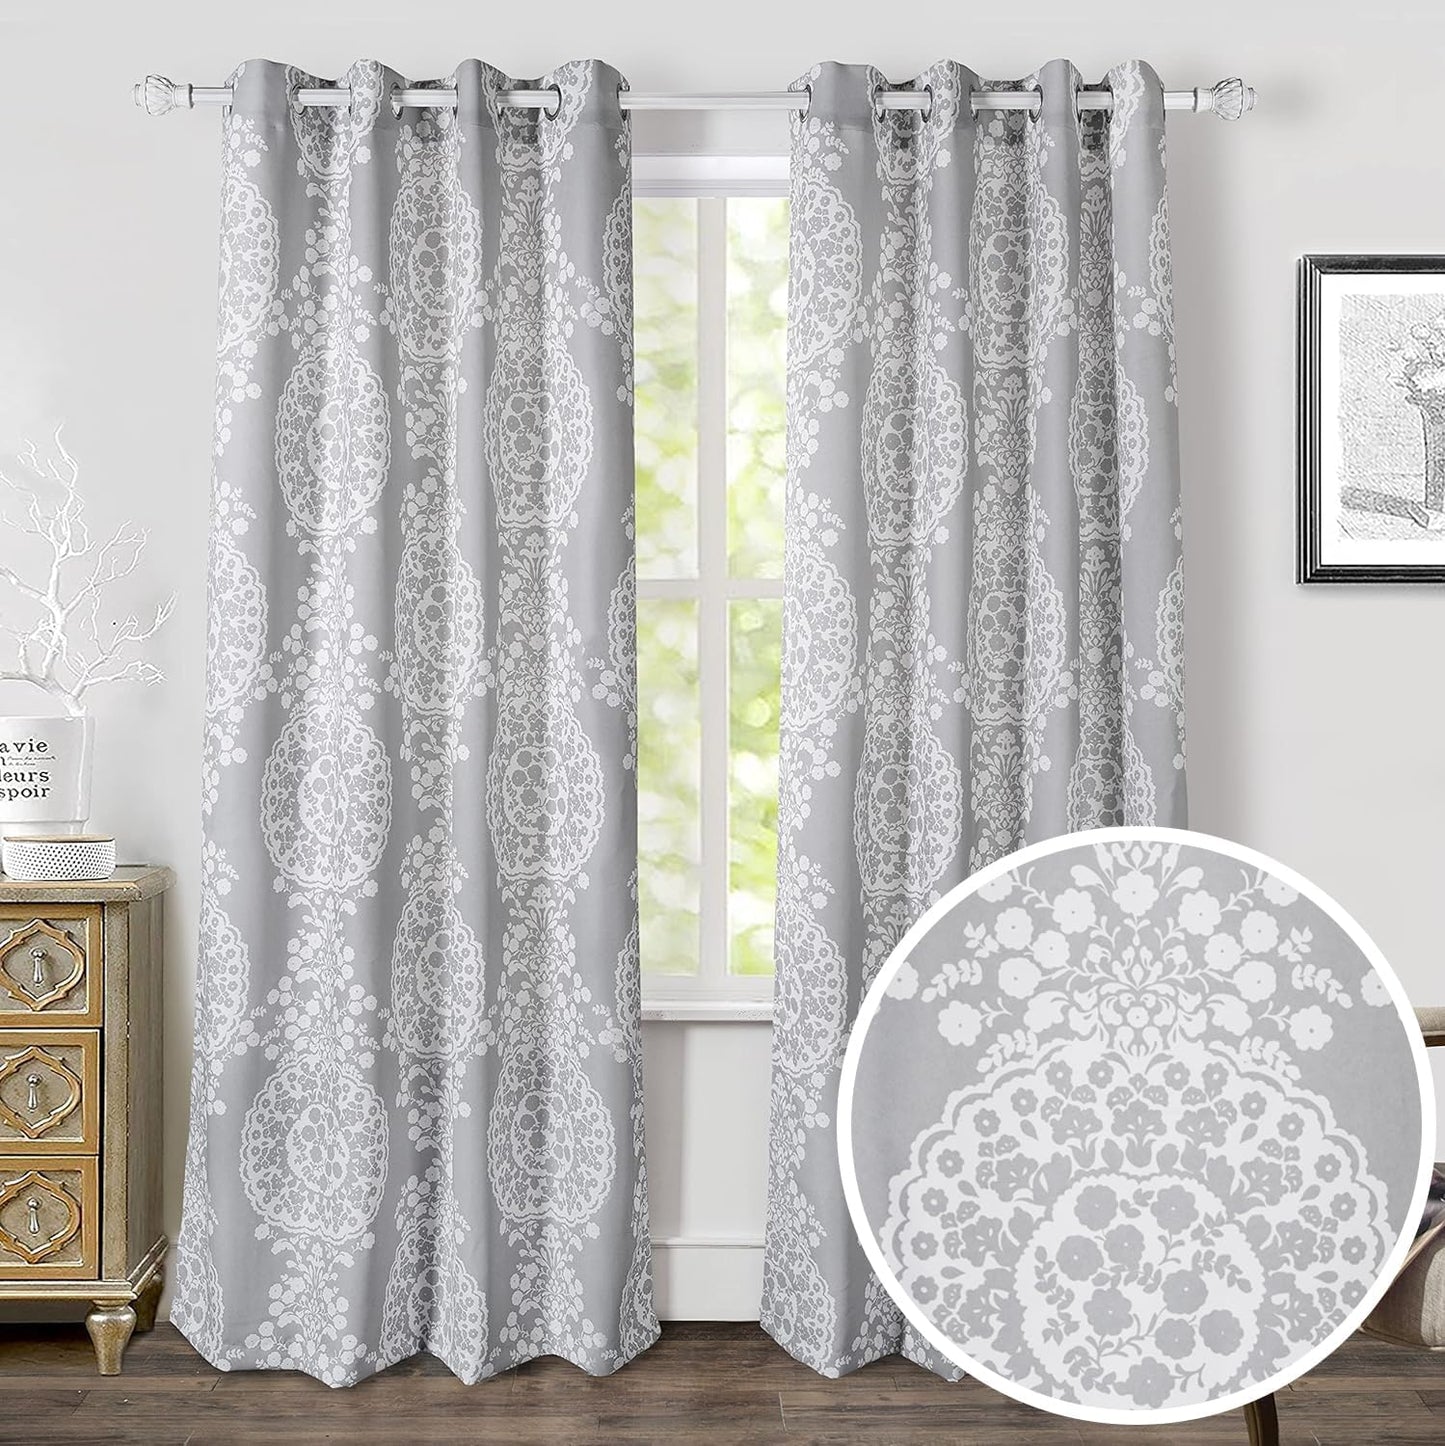 Driftaway Damask Curtains for Kitchen Bathroom Laundry Room Small Windows Floral Damask Medallion Patterned Adjustable Tie up Curtain Single 45 Inch by 63 Inch Dusty Blue  DriftAway Light Gray White (16)52"X84"(Curtains) 